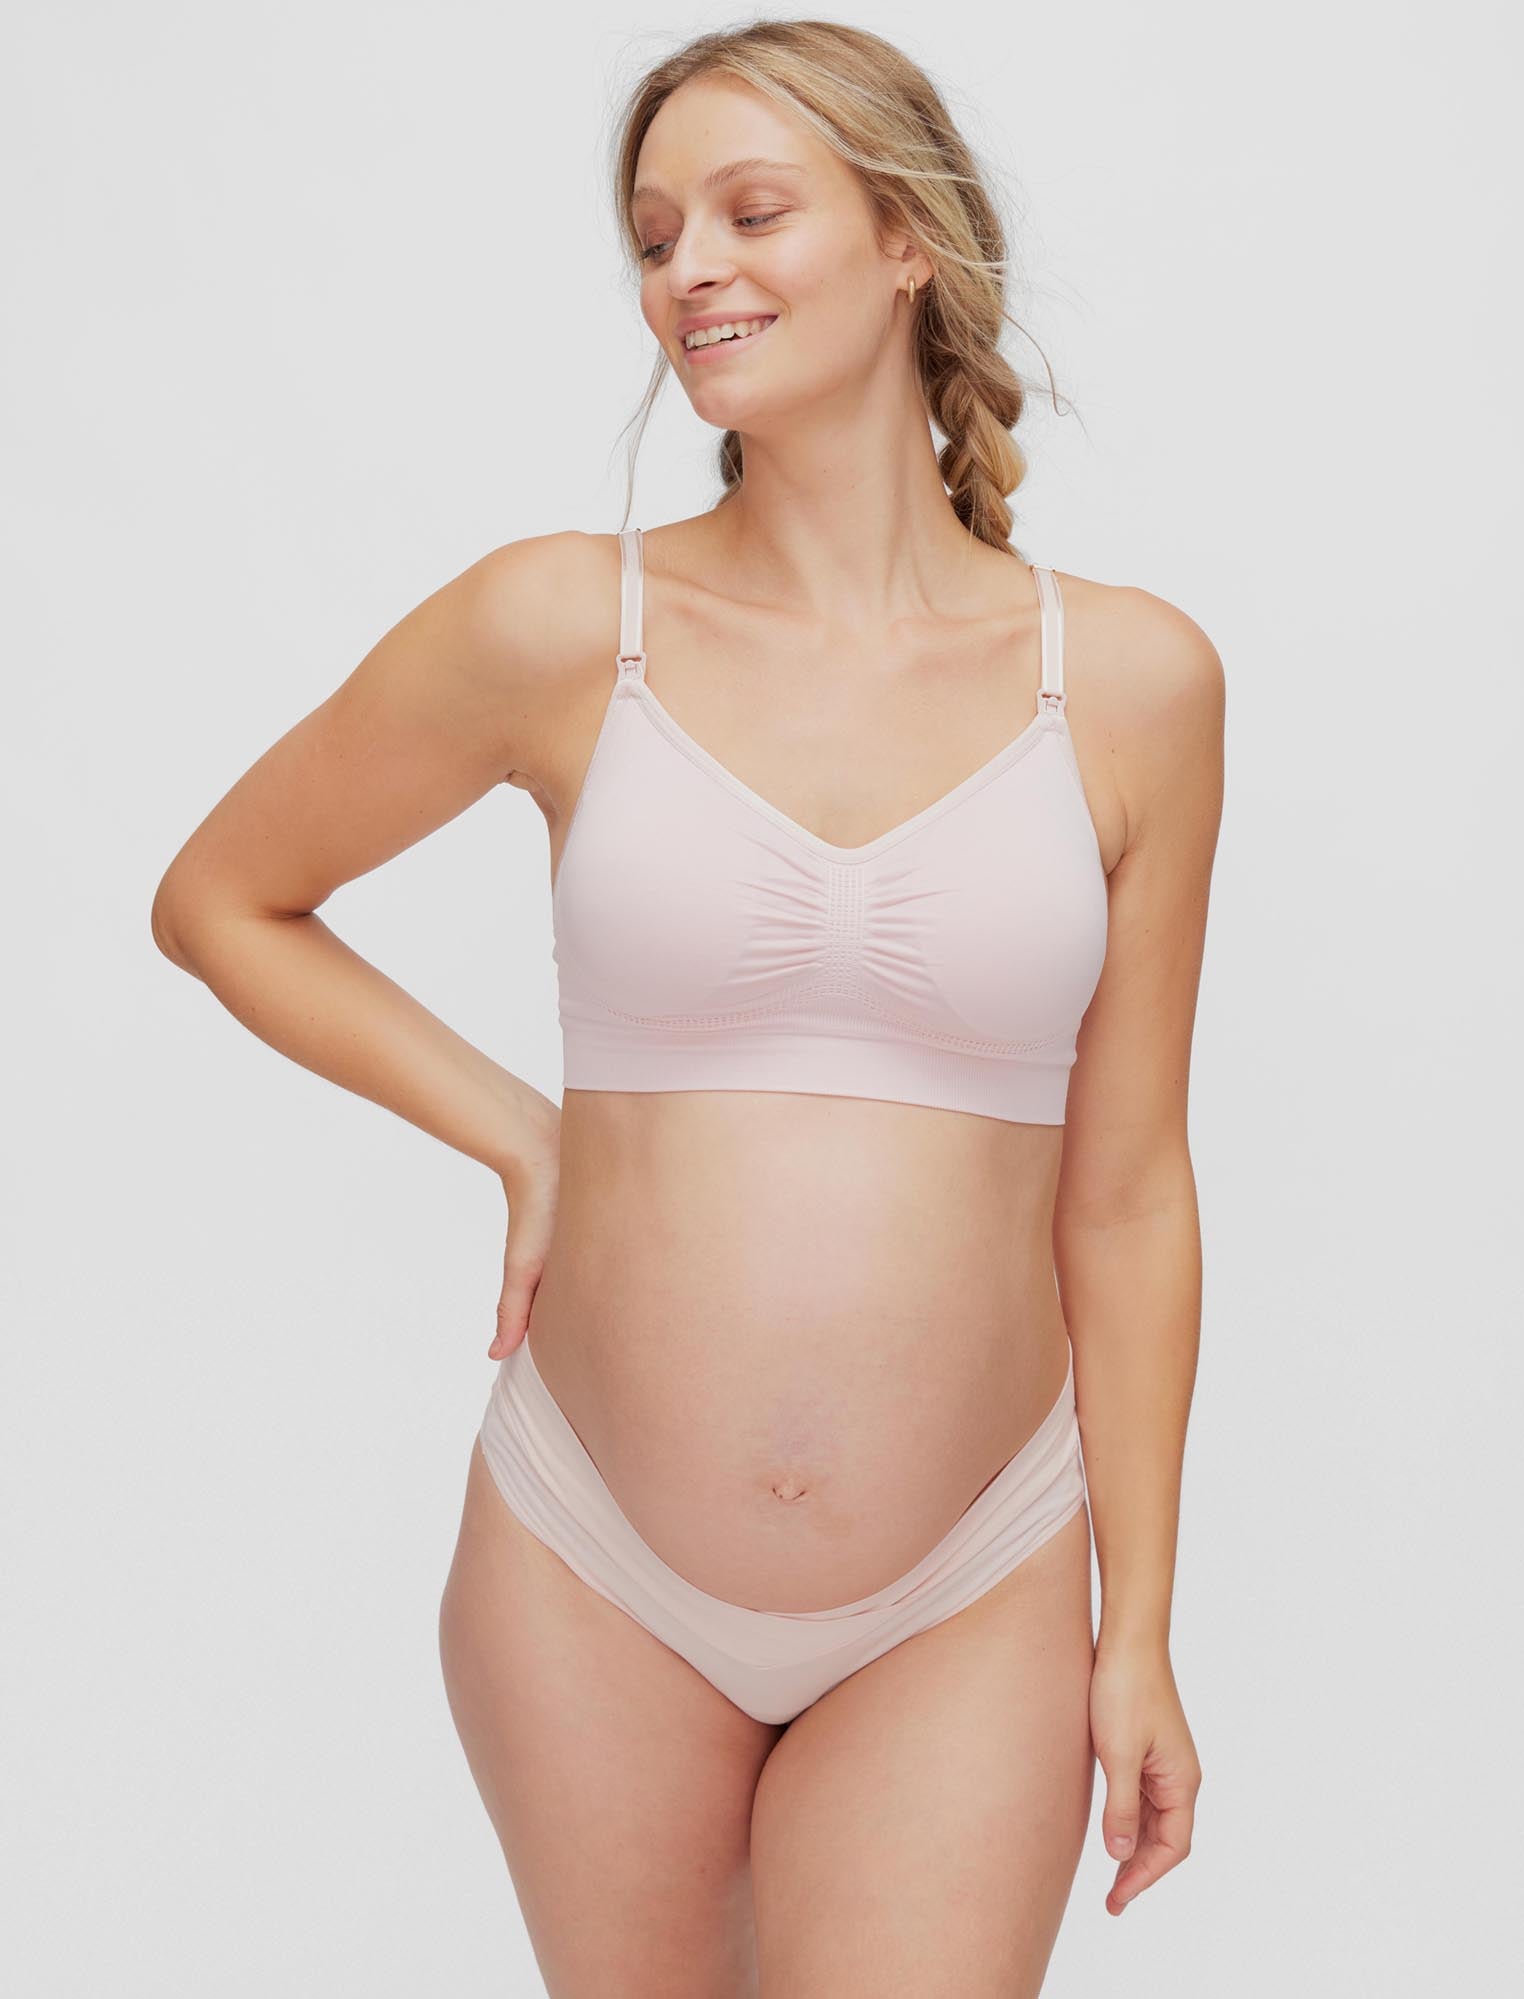 THE EVERYTHING BRA, Hannah's Maternity Nursing Bra. 🧡🧡🧡 Part of  Hannah's BumpFit maternity line, the Everything Bra is a high support…